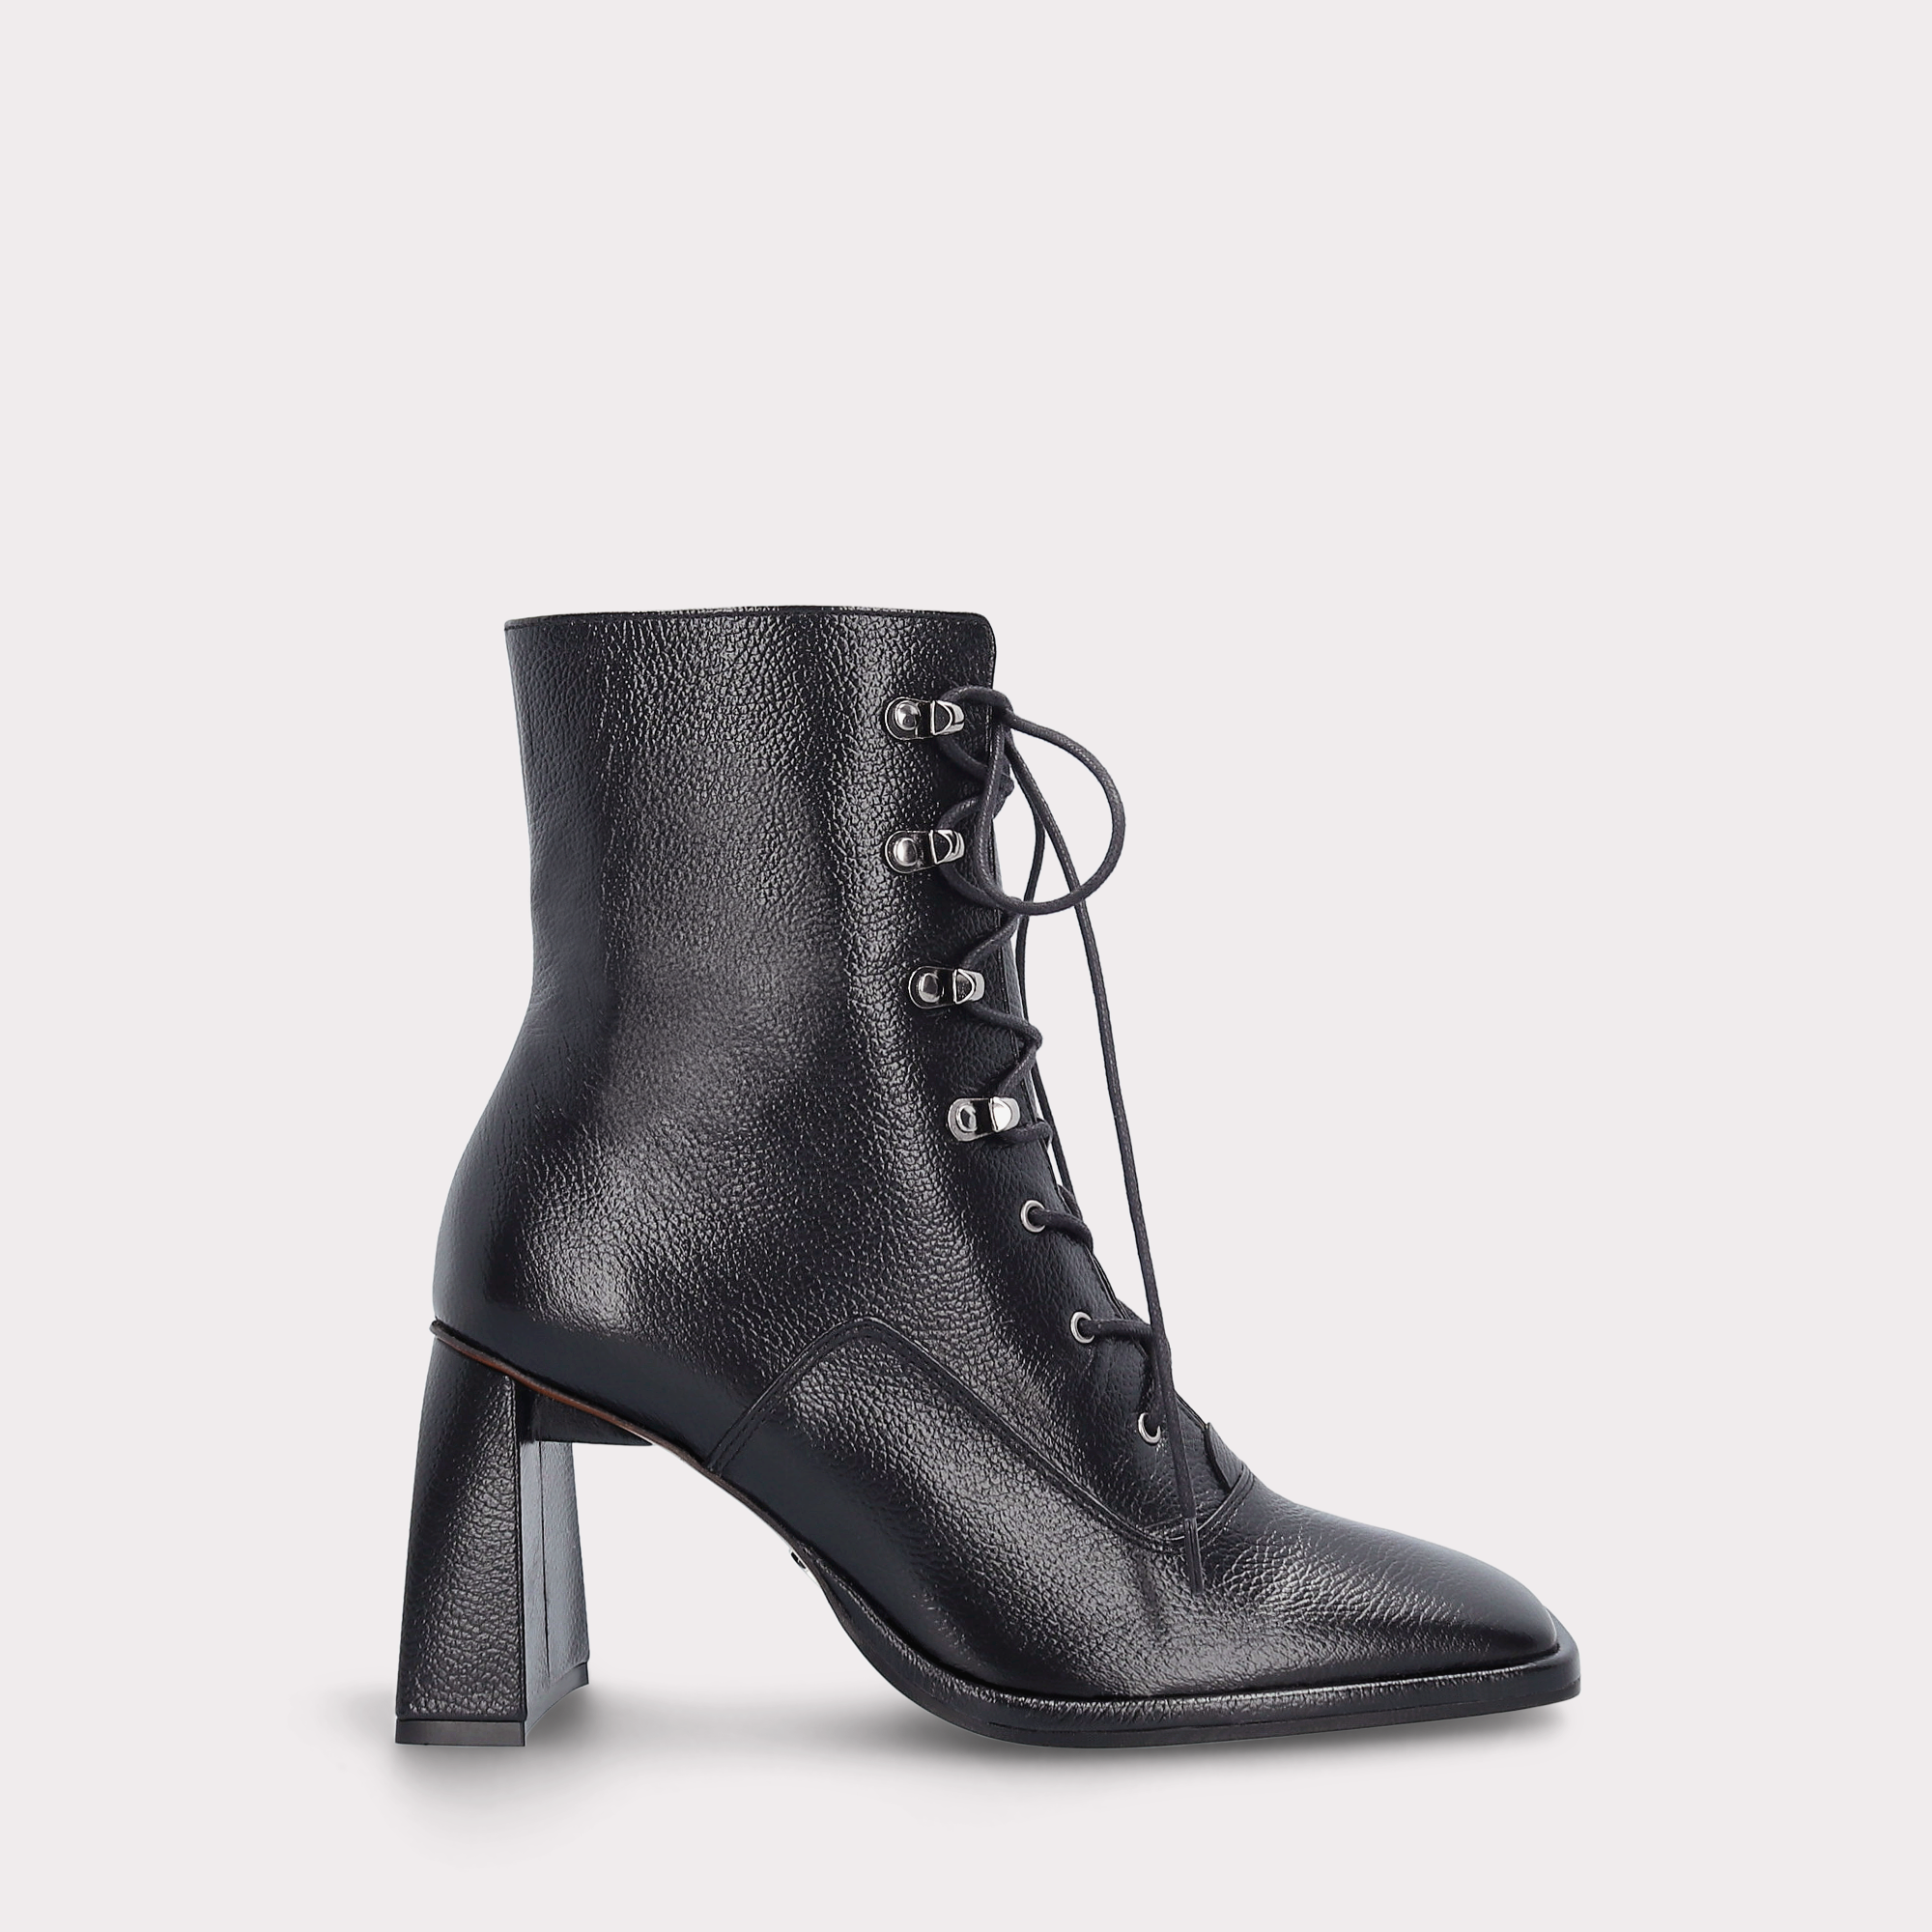 BRENTA 02 BLACK GRAIN LEATHER ANKLE BOOTS